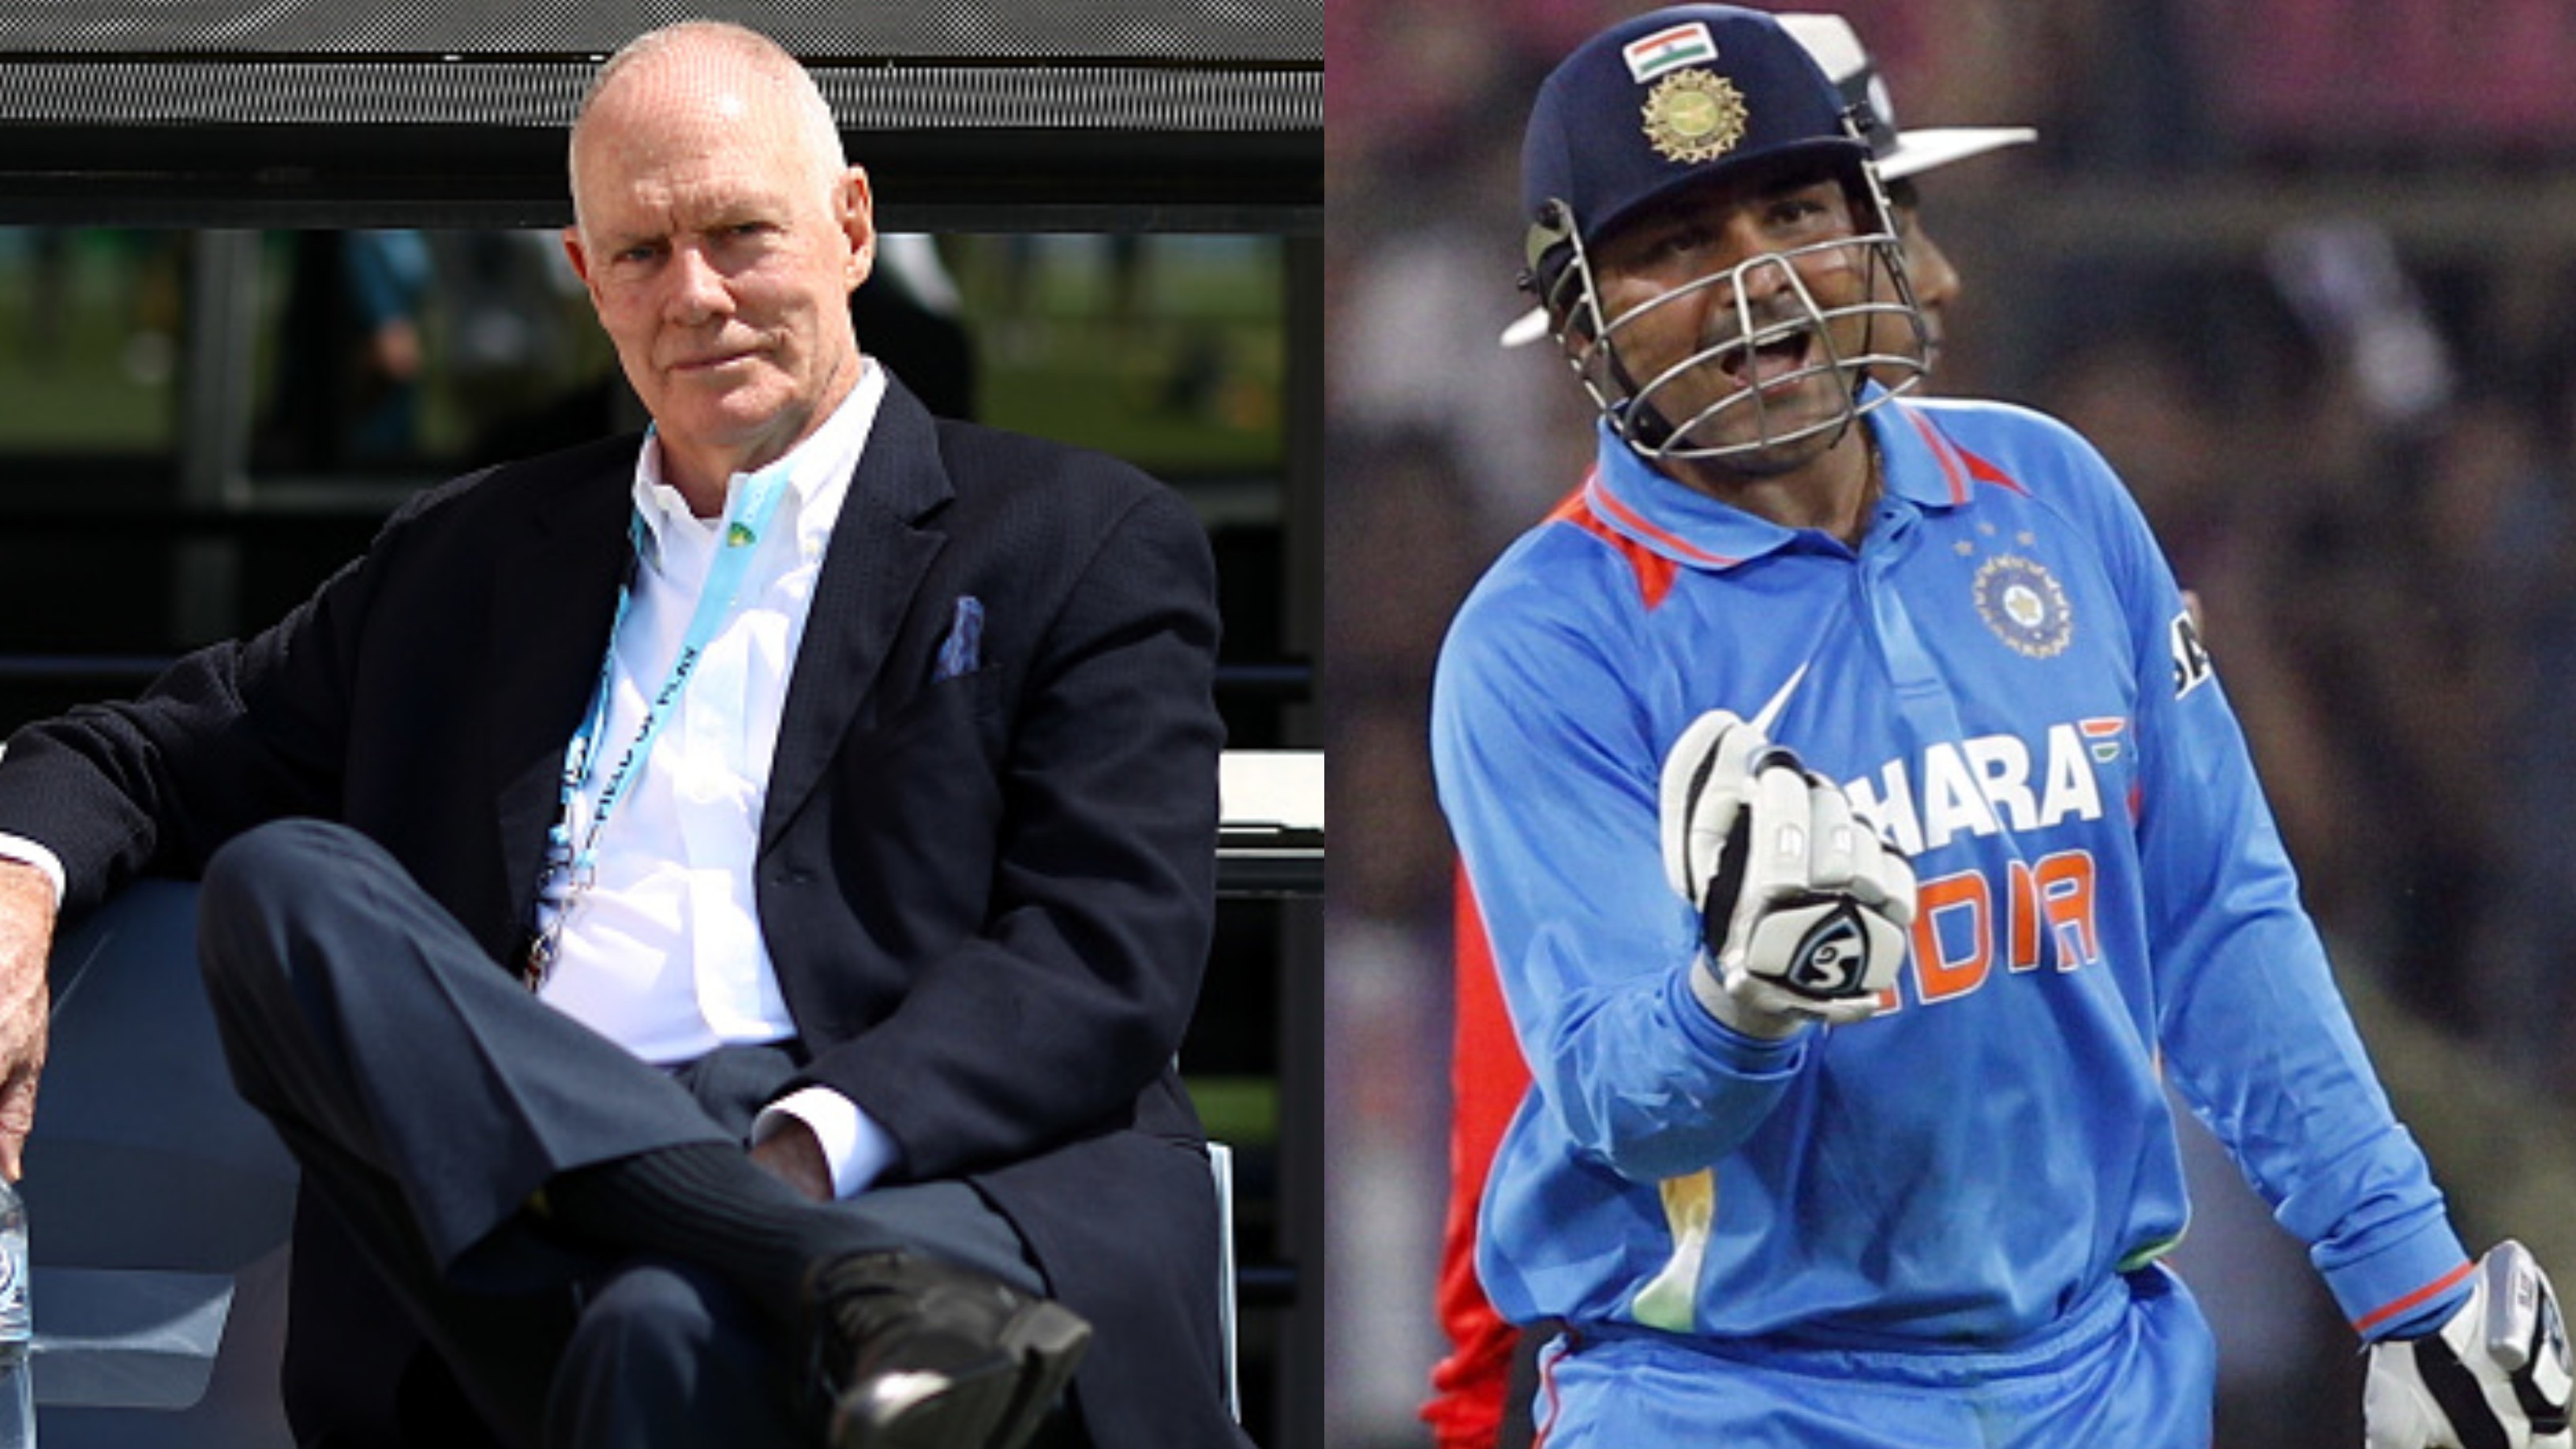 Greg Chappell hails Virender Sehwag; recalls conversation with 